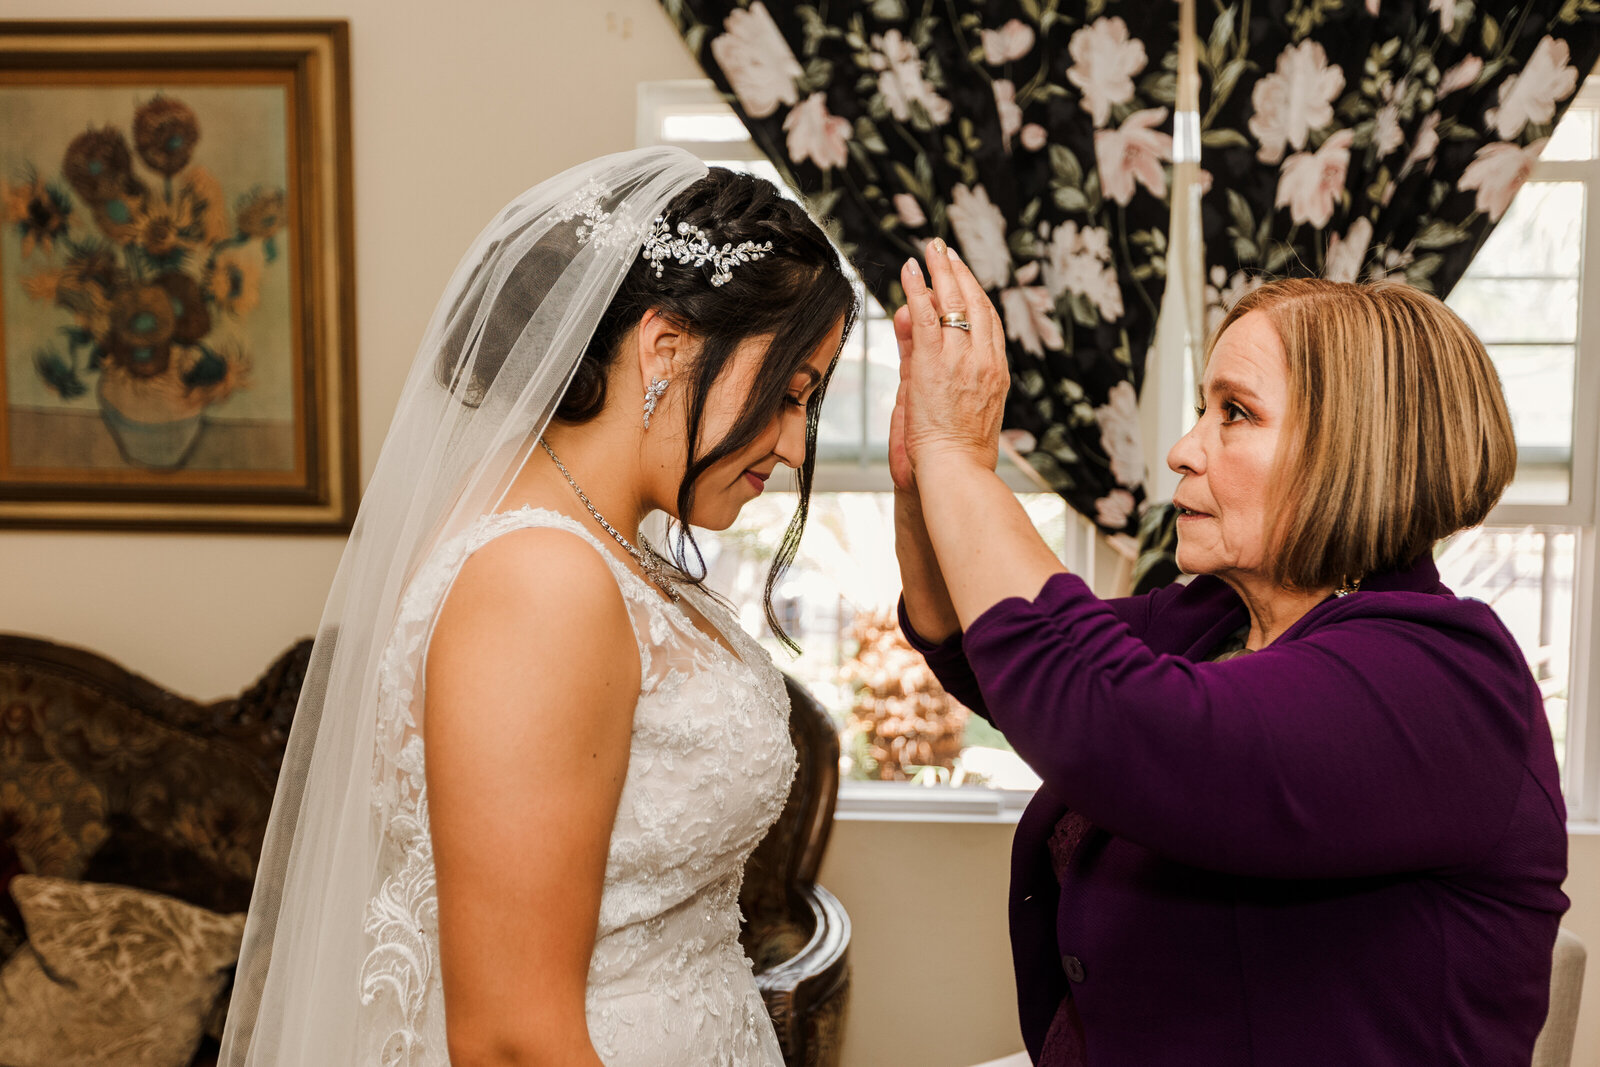 Mother of the Bride gives a blessing before leaving for the wedding in Santa Ana